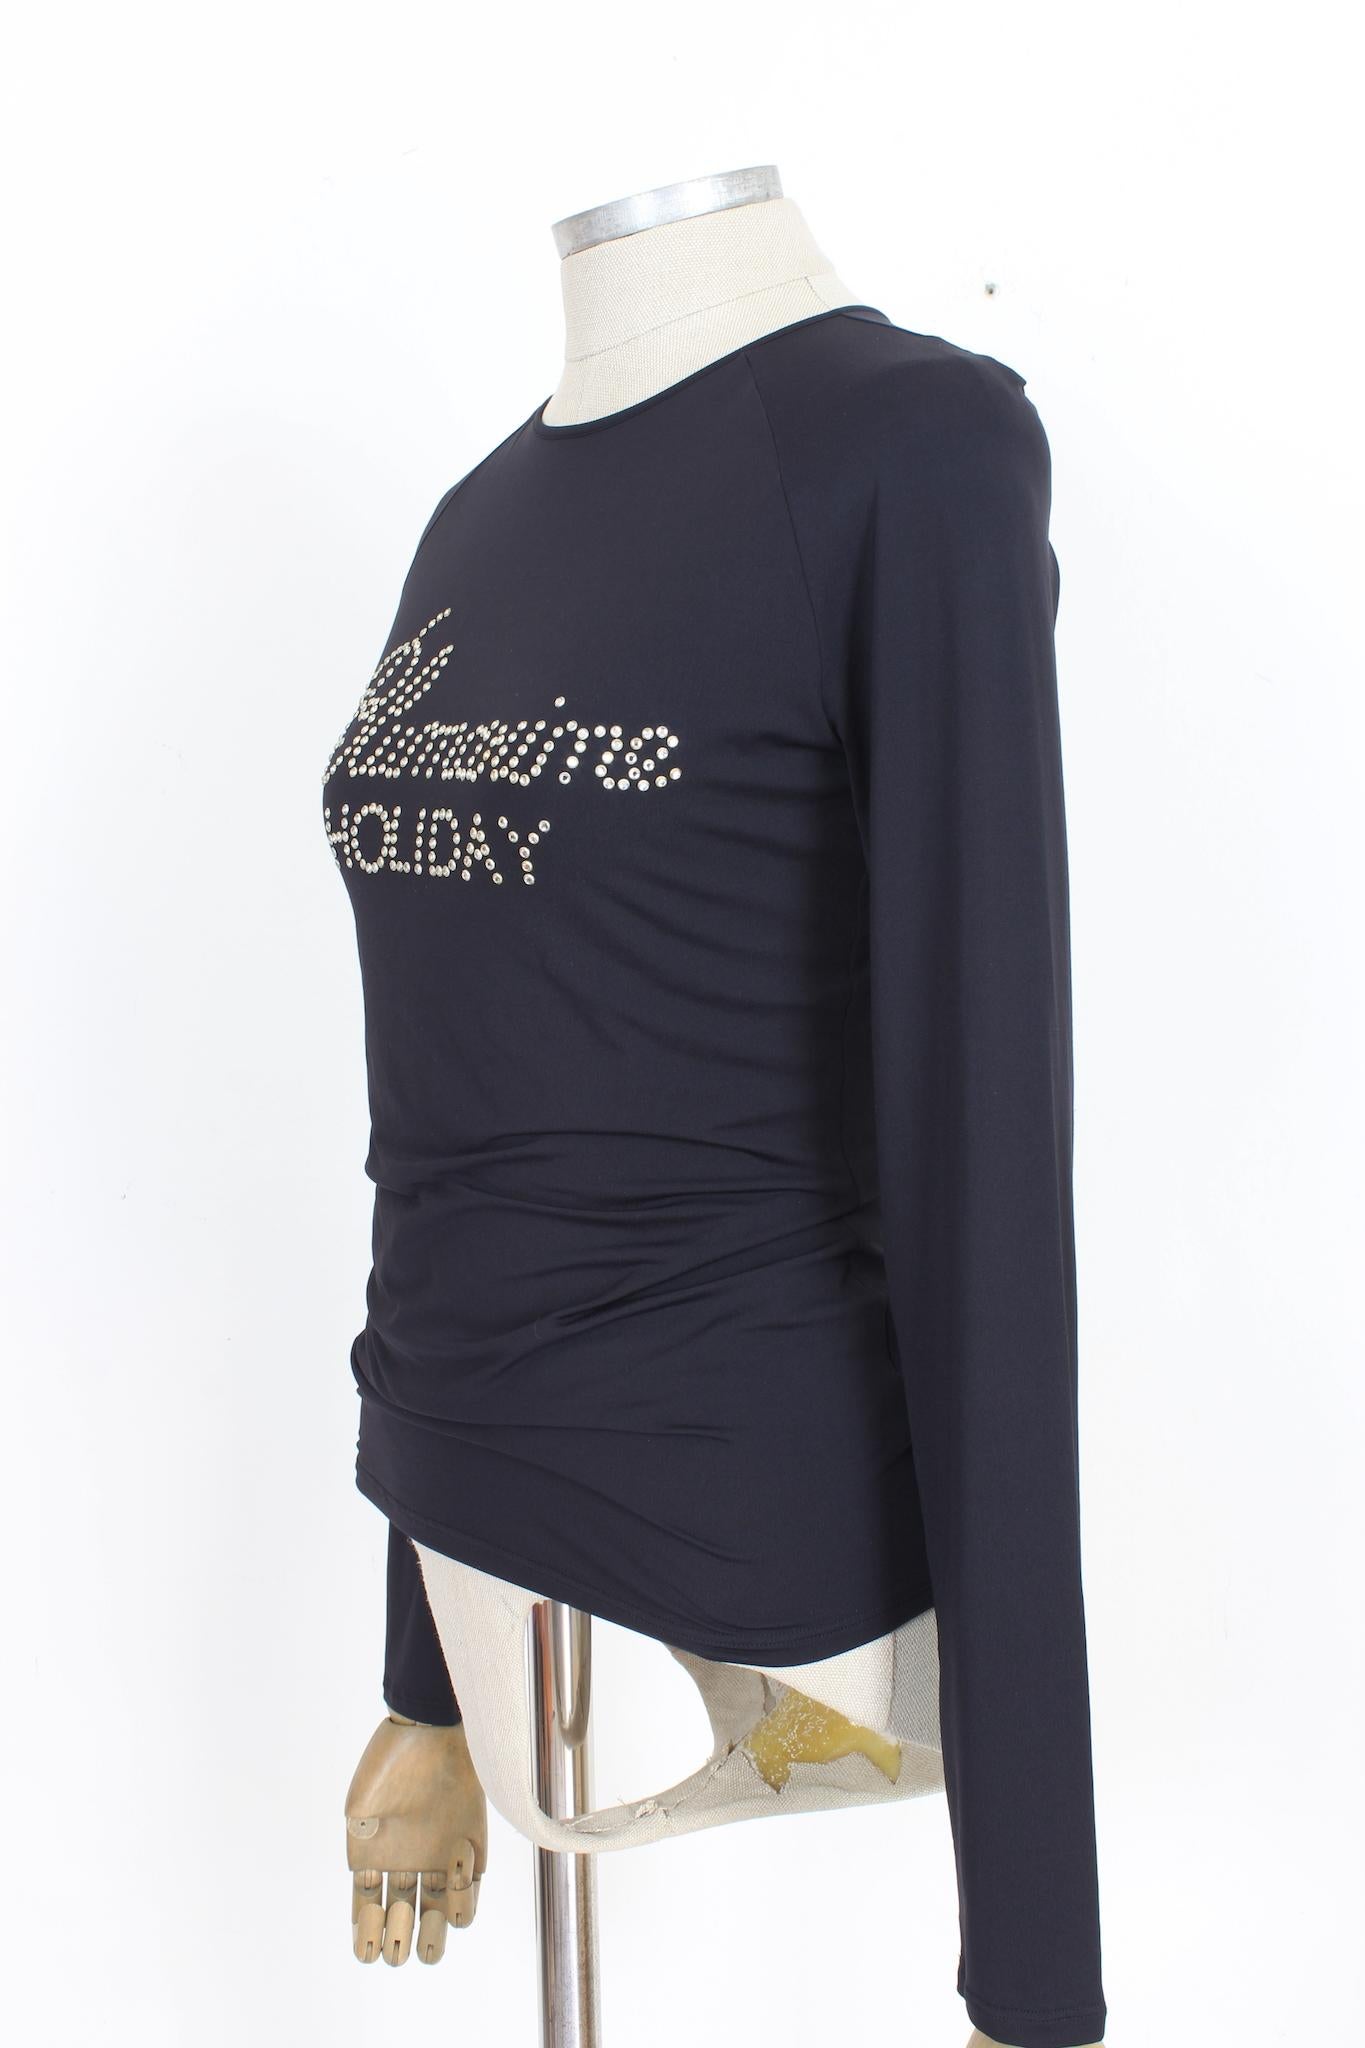 Blumarine 2000s black fitted shirt. Long sleeves, written on the chest covered in silver-colored swarosky. Open back with neck strap. Fabric in 89% polyamide, 11% spandex. Made in Italy.

Size: 42 It 8 Us 10 Uk

Shoulder: 42 cm
Bust/Chest: 44